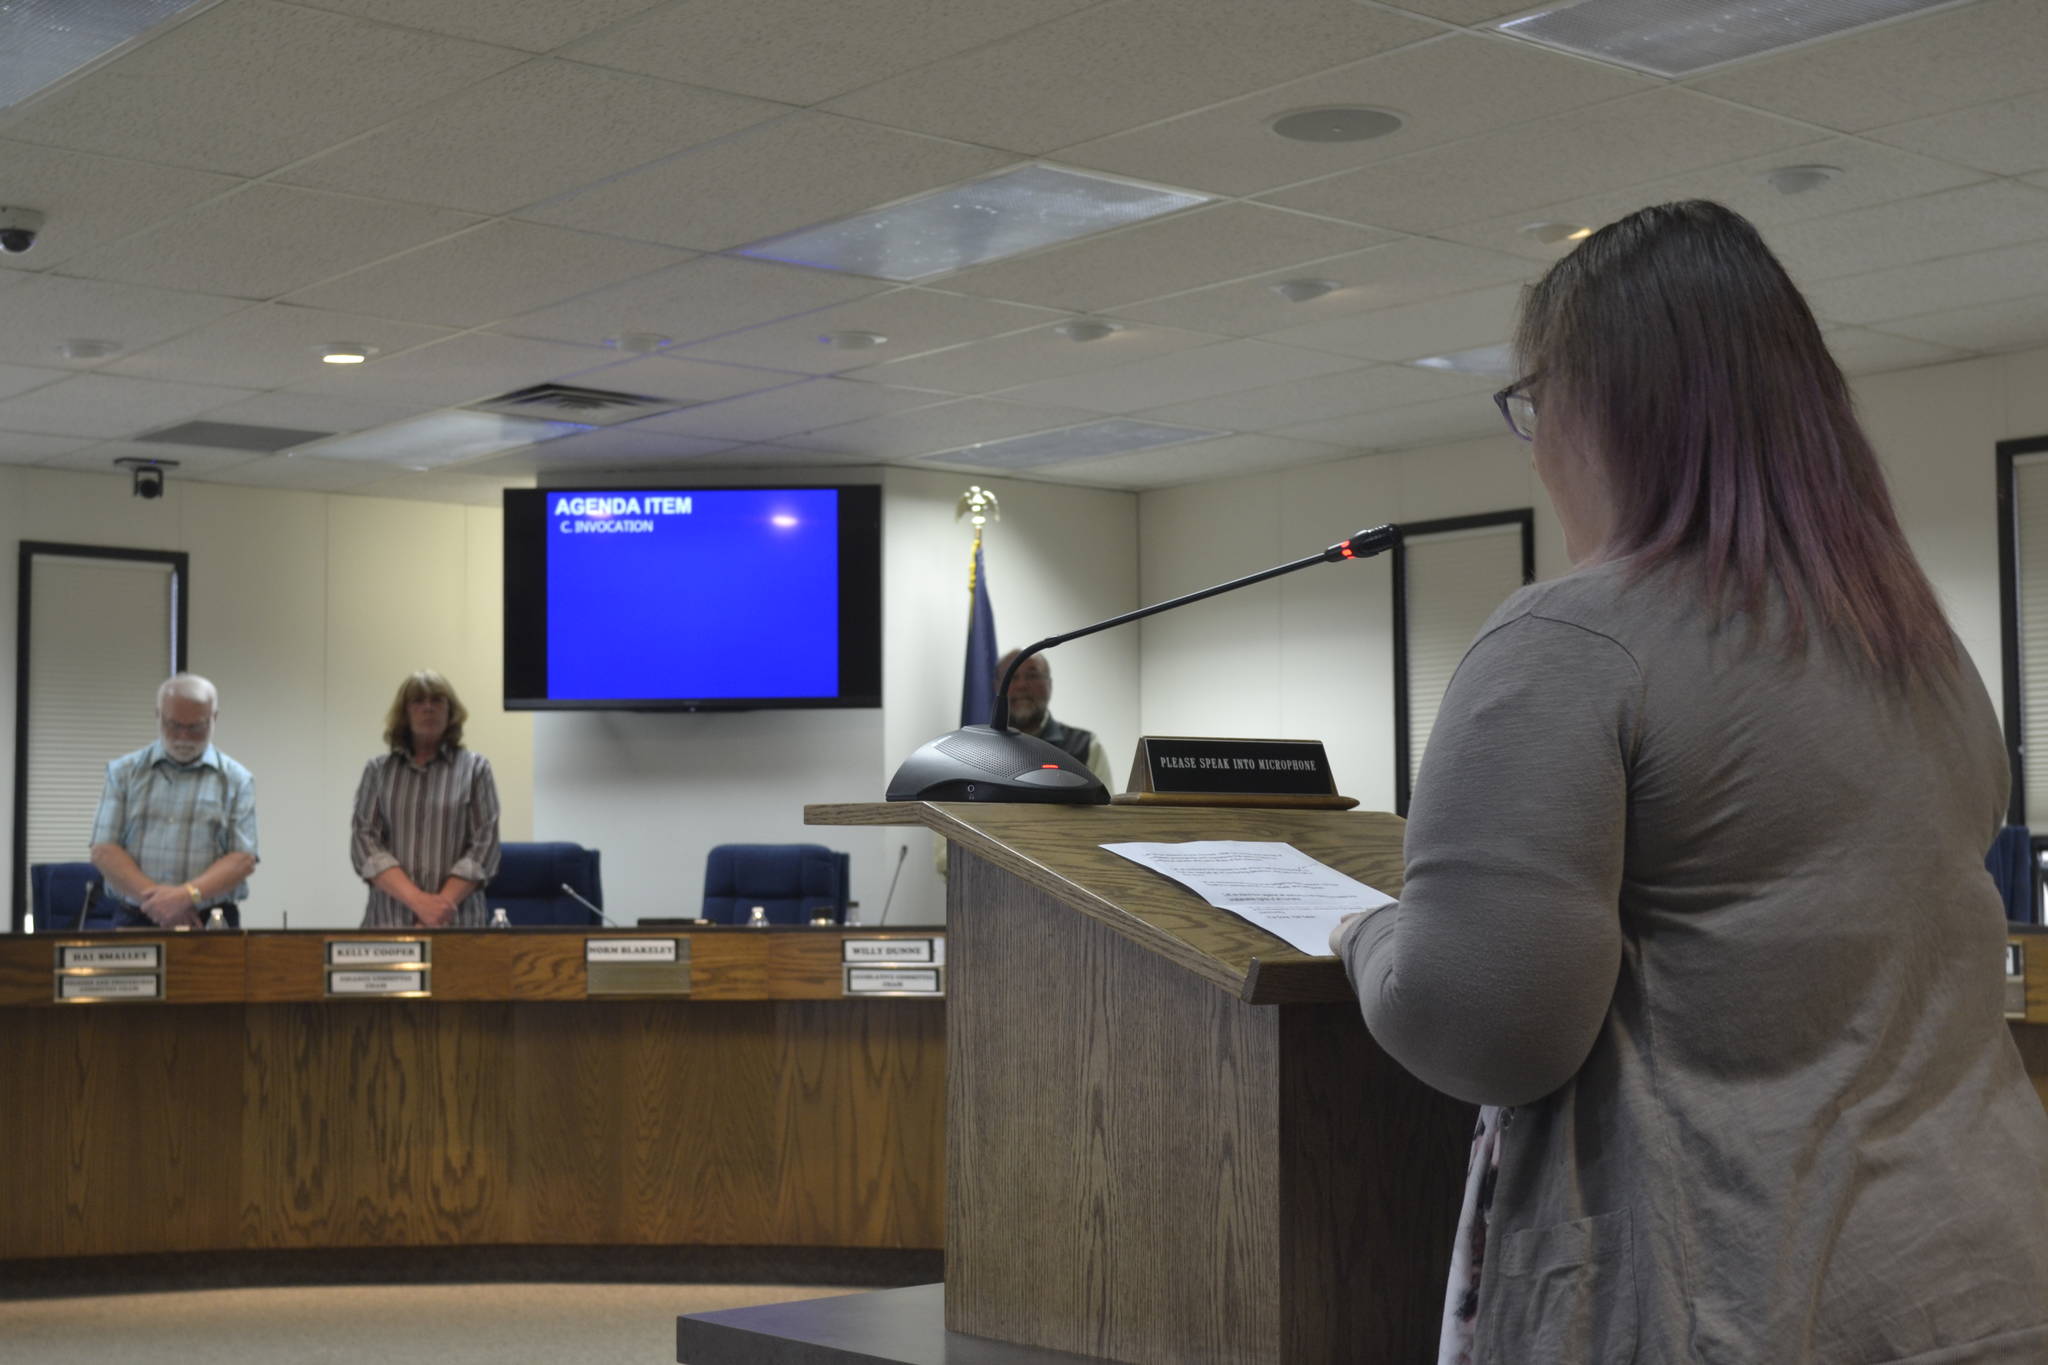 Kenai Peninsula Borough resident and member of the Satanic Temple, Iris Fontana, offers an invocation at the Kenai Peninsula Borough Assembly meeting, which prompted borough official and attendee walkouts and a protest on Tuesday, June 18, 2019, in Soldotna, Alaska. (Photo by Victoria Petersen/Peninsula Clarion)